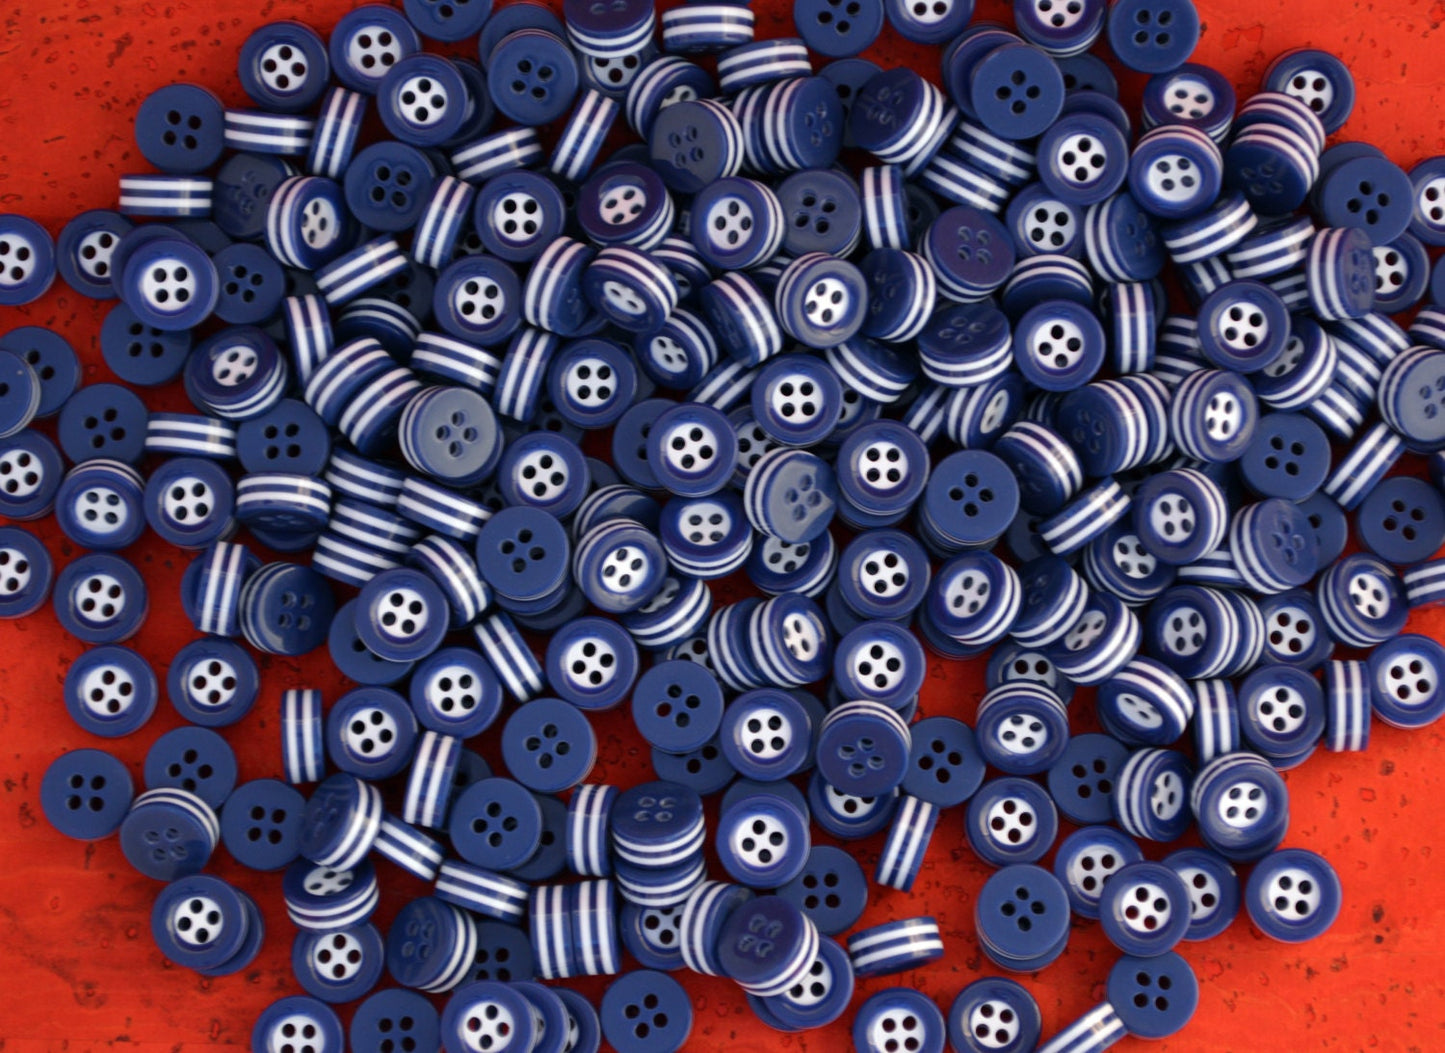 20 white and blue STRIPED BUTTONS - 5mm thick! - choose from sizes 18L 16L - great quality - Made in ITALY